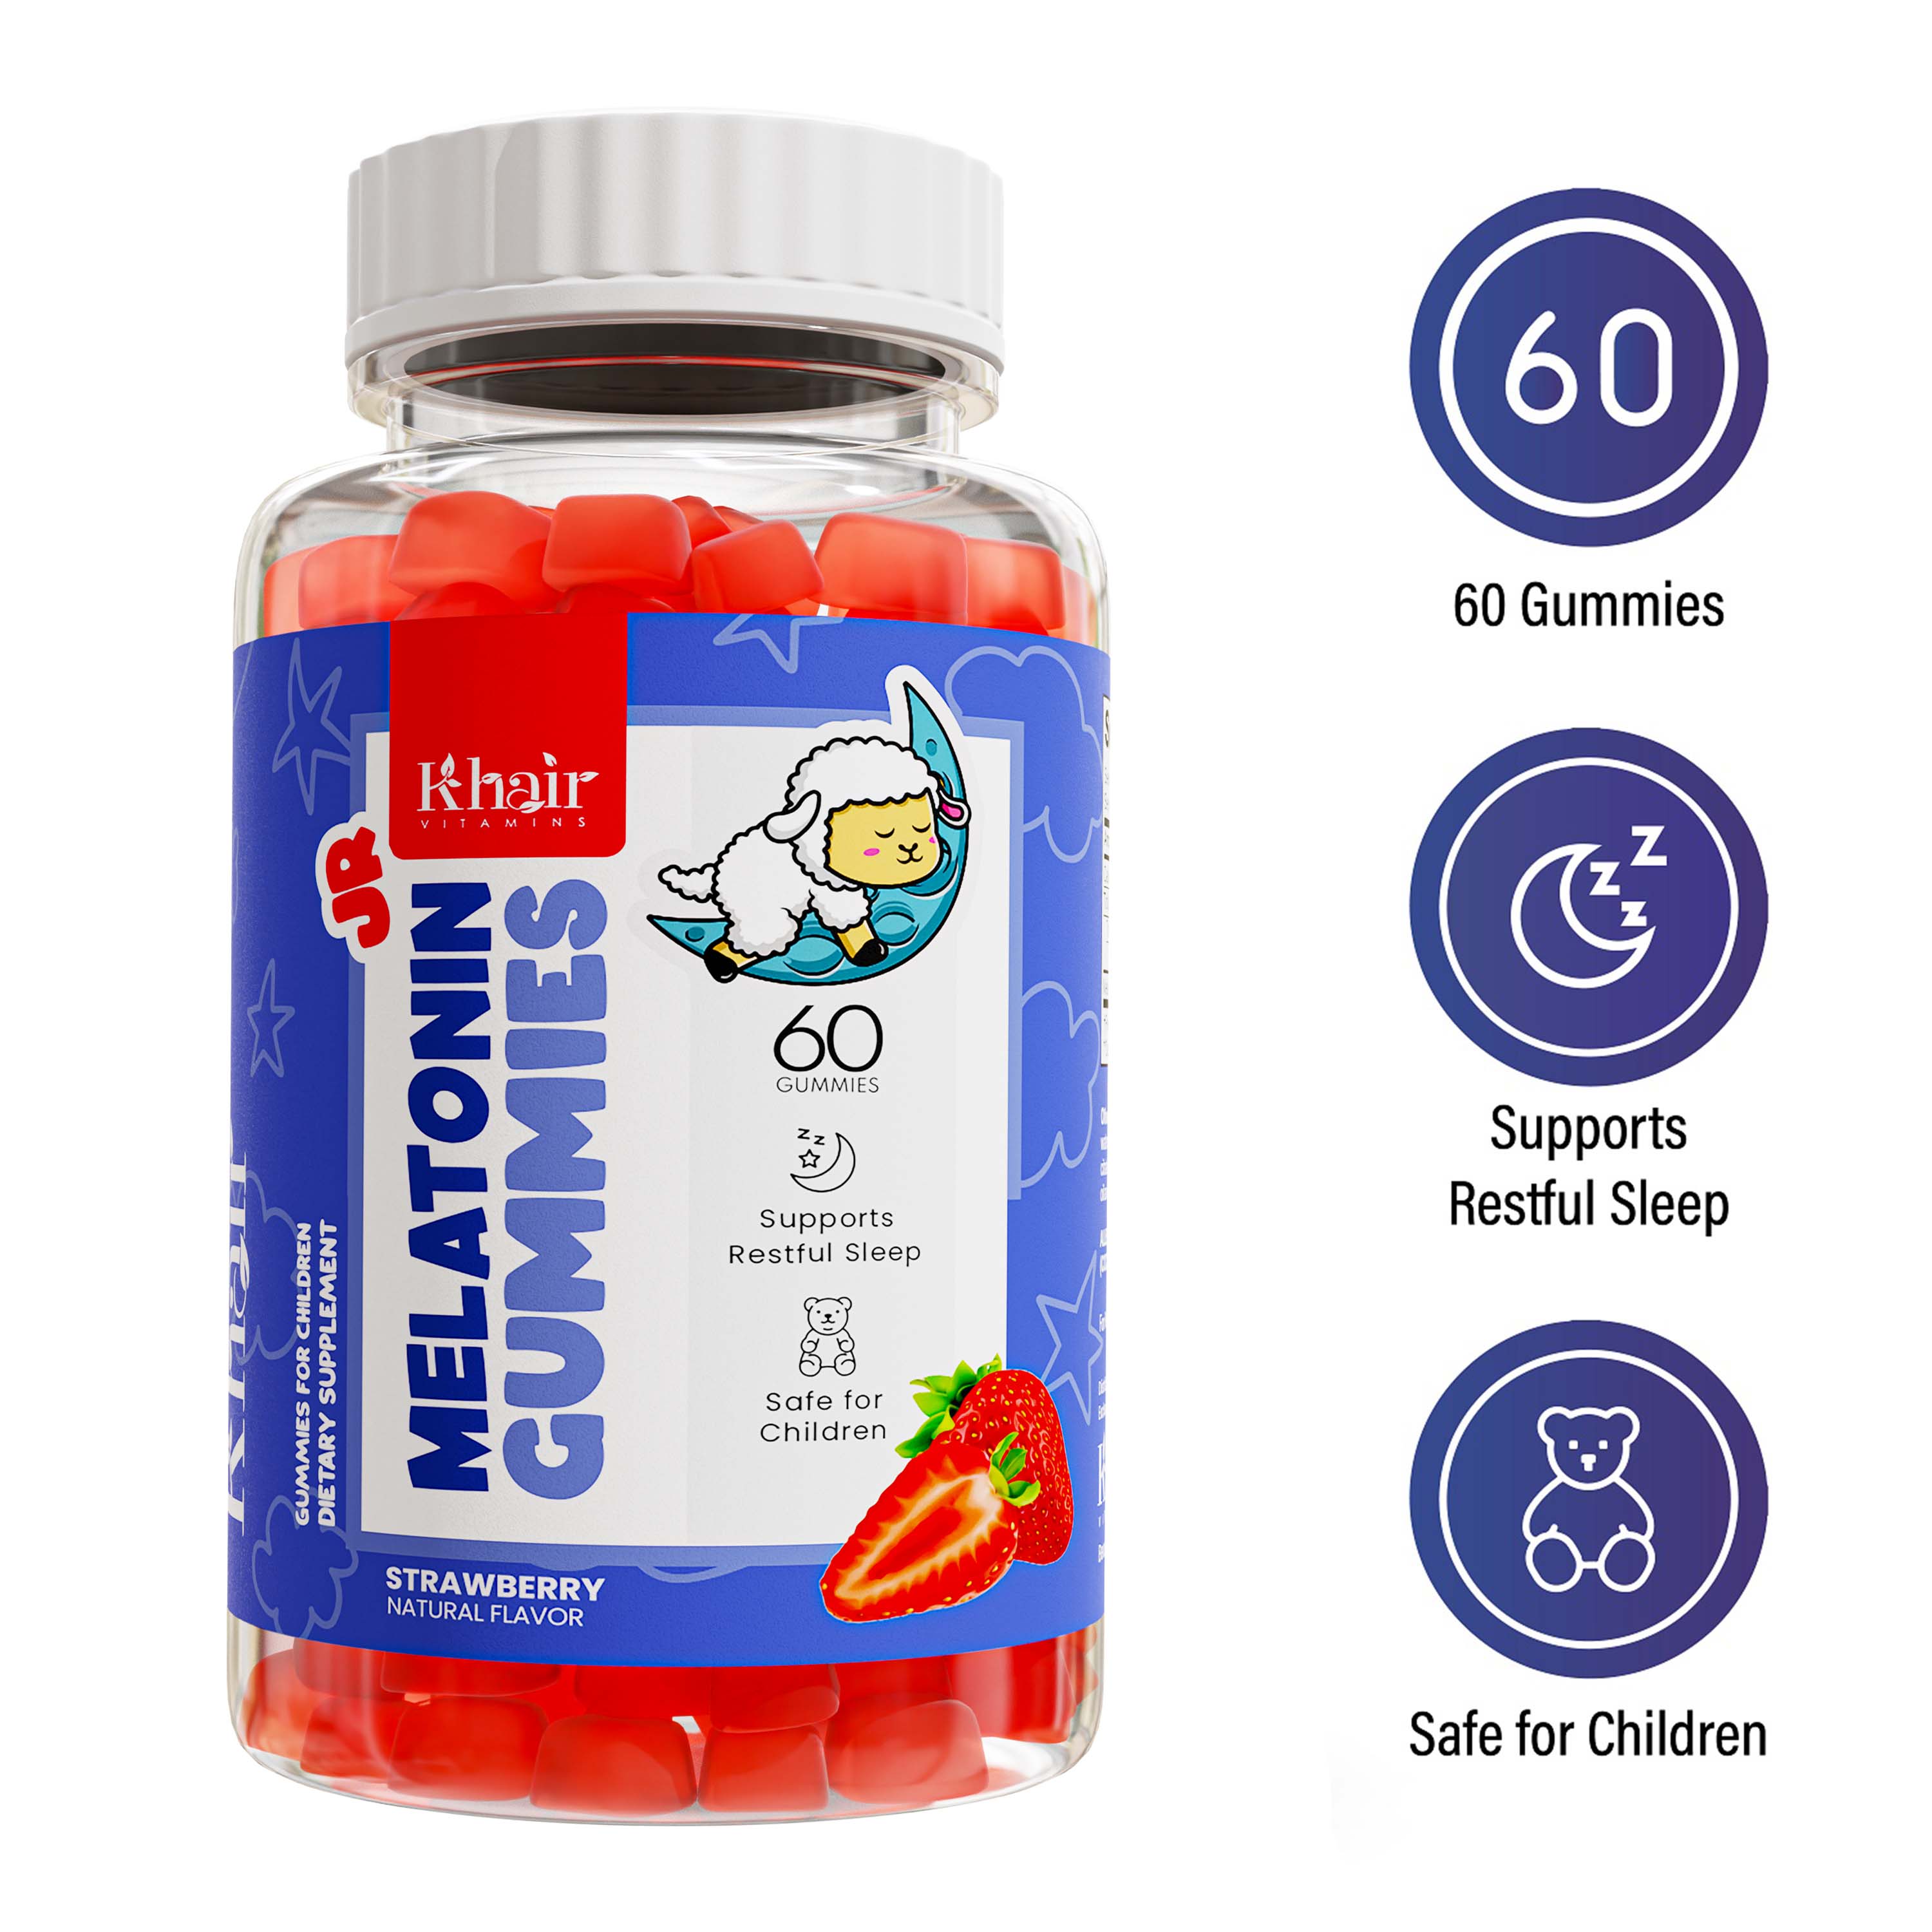 A bottle of Khair Super JR Gummies for kids, featuring 60 multivitamin gummies in cherry, strawberry, and orange flavors, labeled as nutrient-rich and gluten-free.